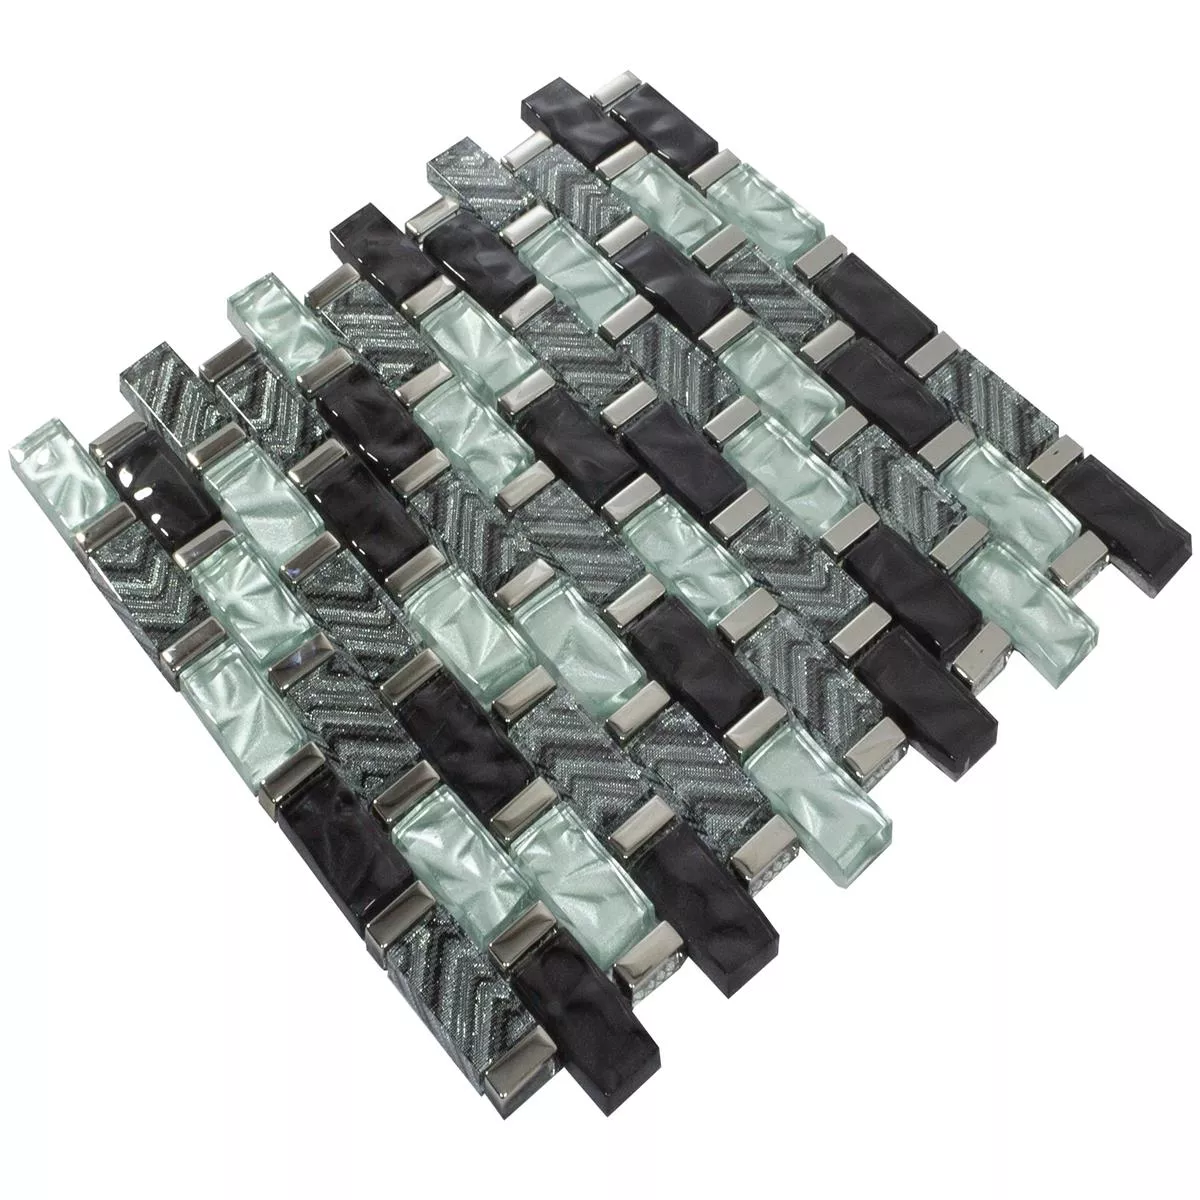 Sample Glass Mosaic Tiles Vancouver Waved Grey Blue Mix